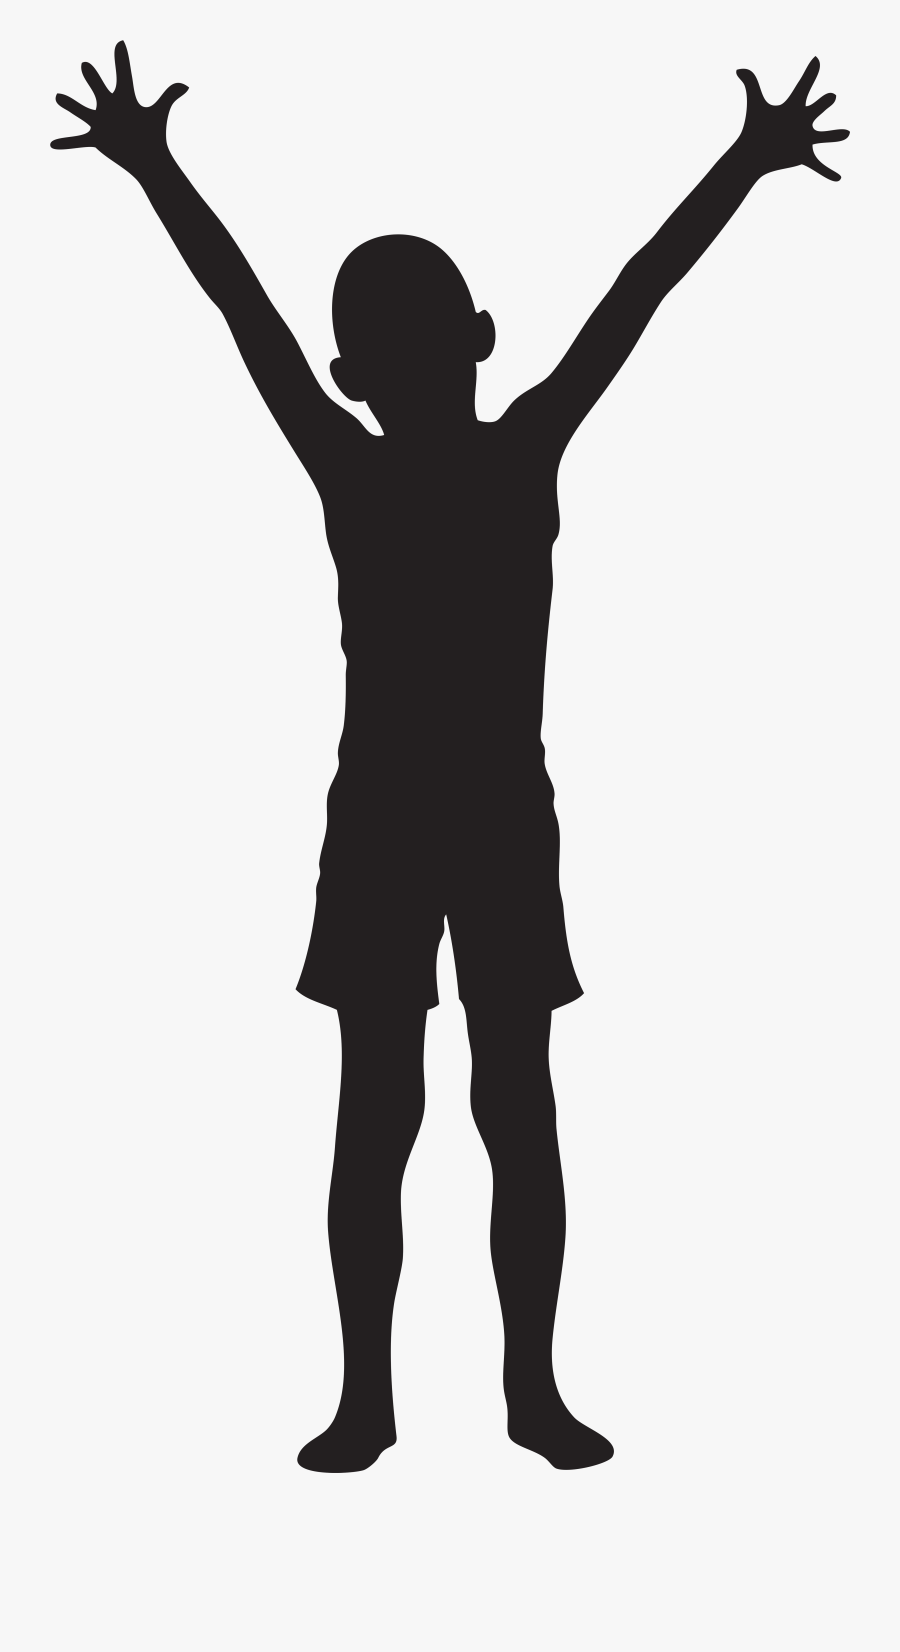 Silhouette At Getdrawings Com - Boy With Ball Silhouette, Transparent Clipart